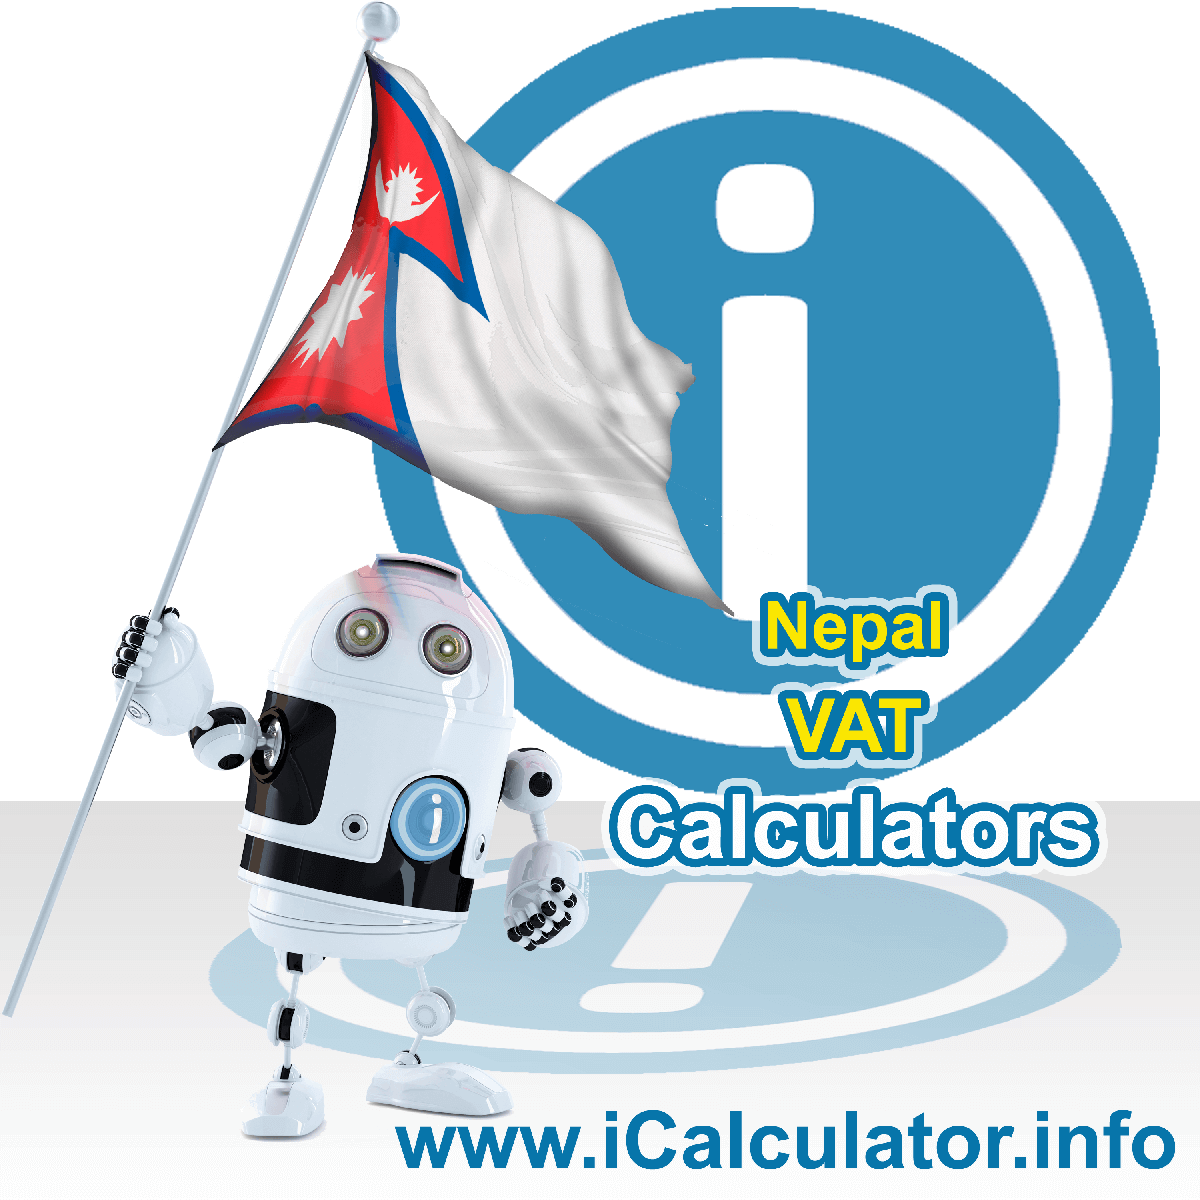 Nepal VAT Calculator. This image shows the Nepal flag and information relating to the VAT formula used for calculating Value Added Tax in Nepal using the Nepal VAT Calculator in 2079